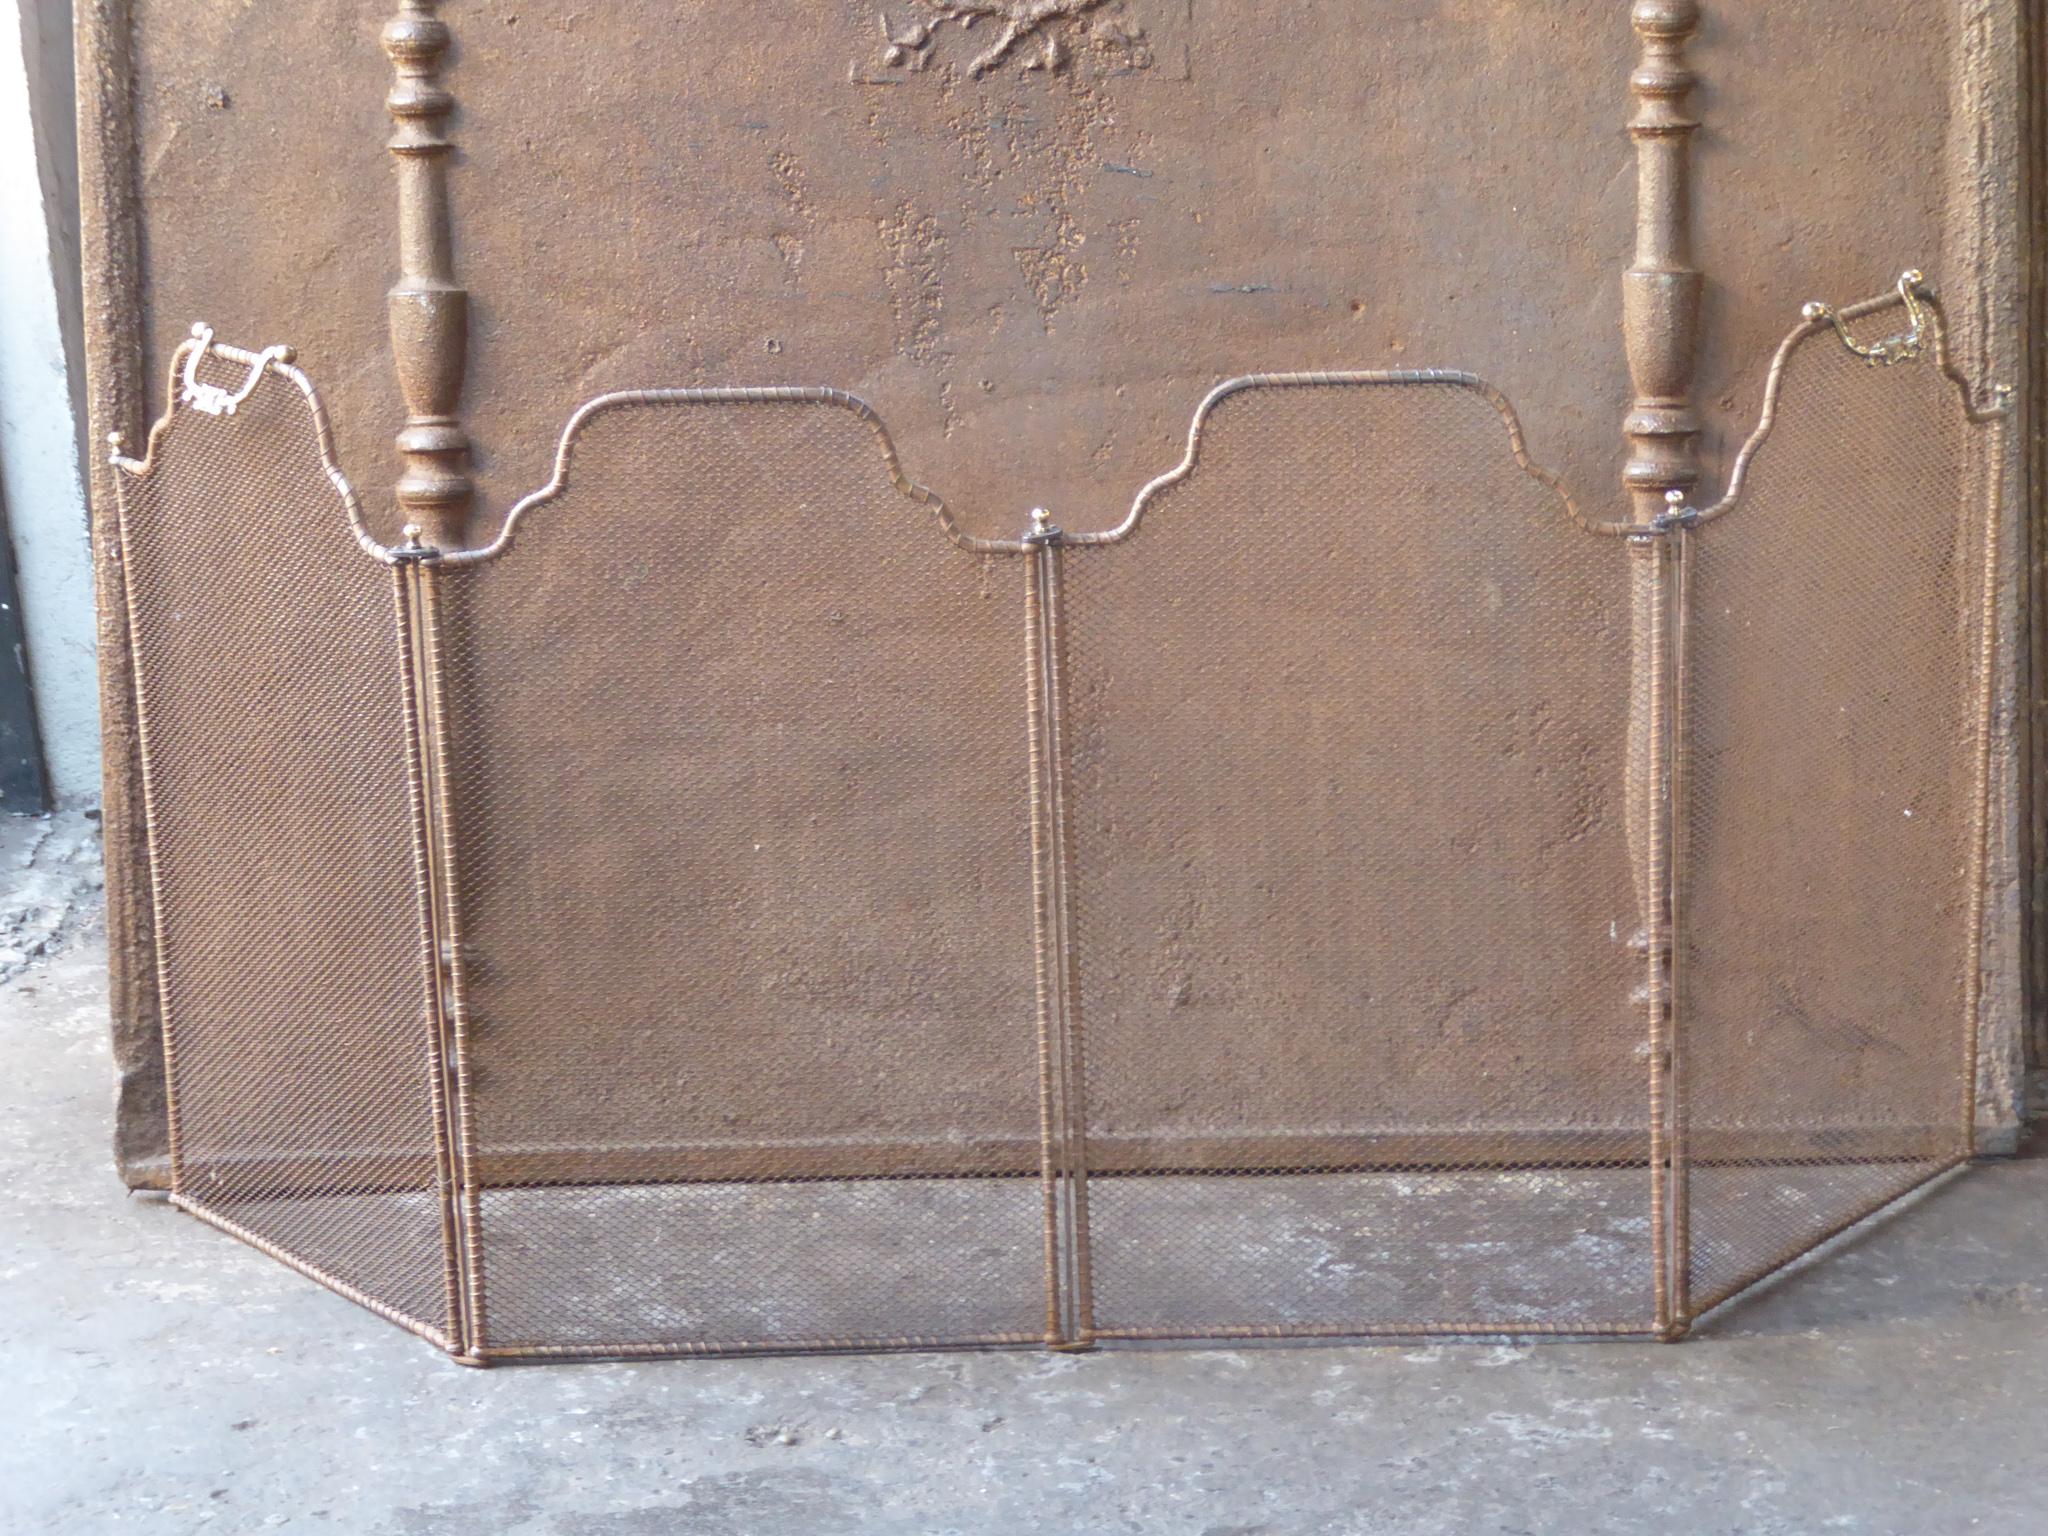 19th Century French Napoleon III four-panel fireplace screen. The screen is made of brass, iron and iron mesh. It is in a good condition and is fit for use in front of the fireplace.